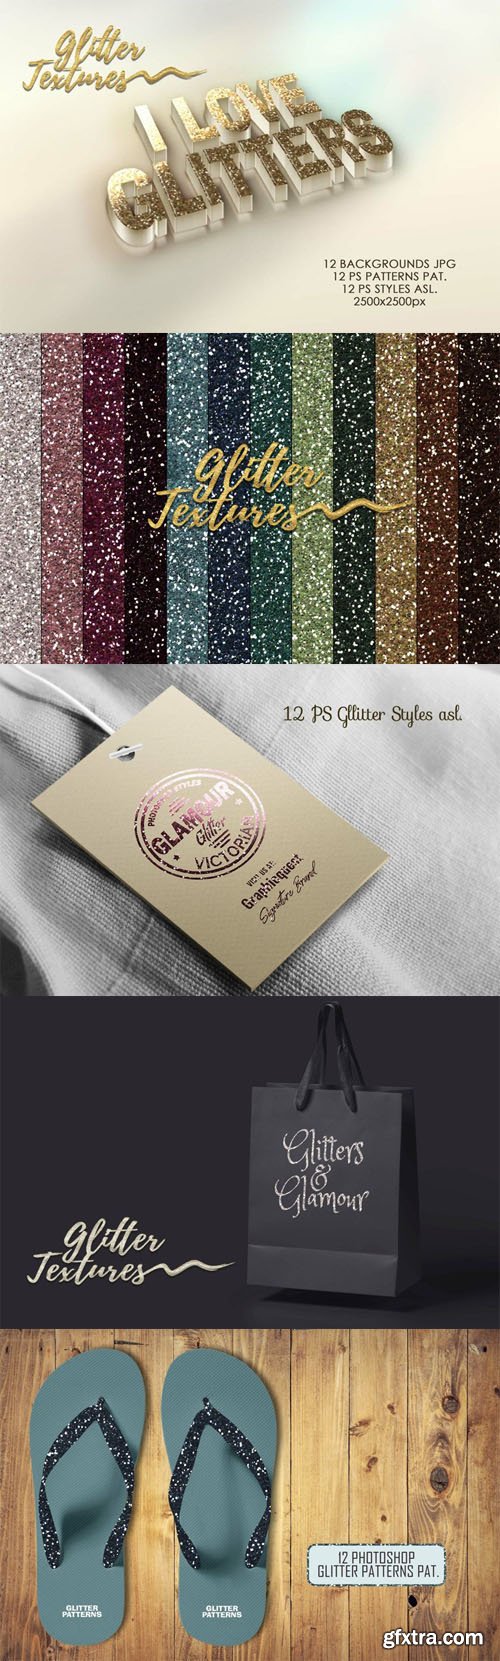 12 Glitter Textures Pack - Photoshop Styles & Patterns